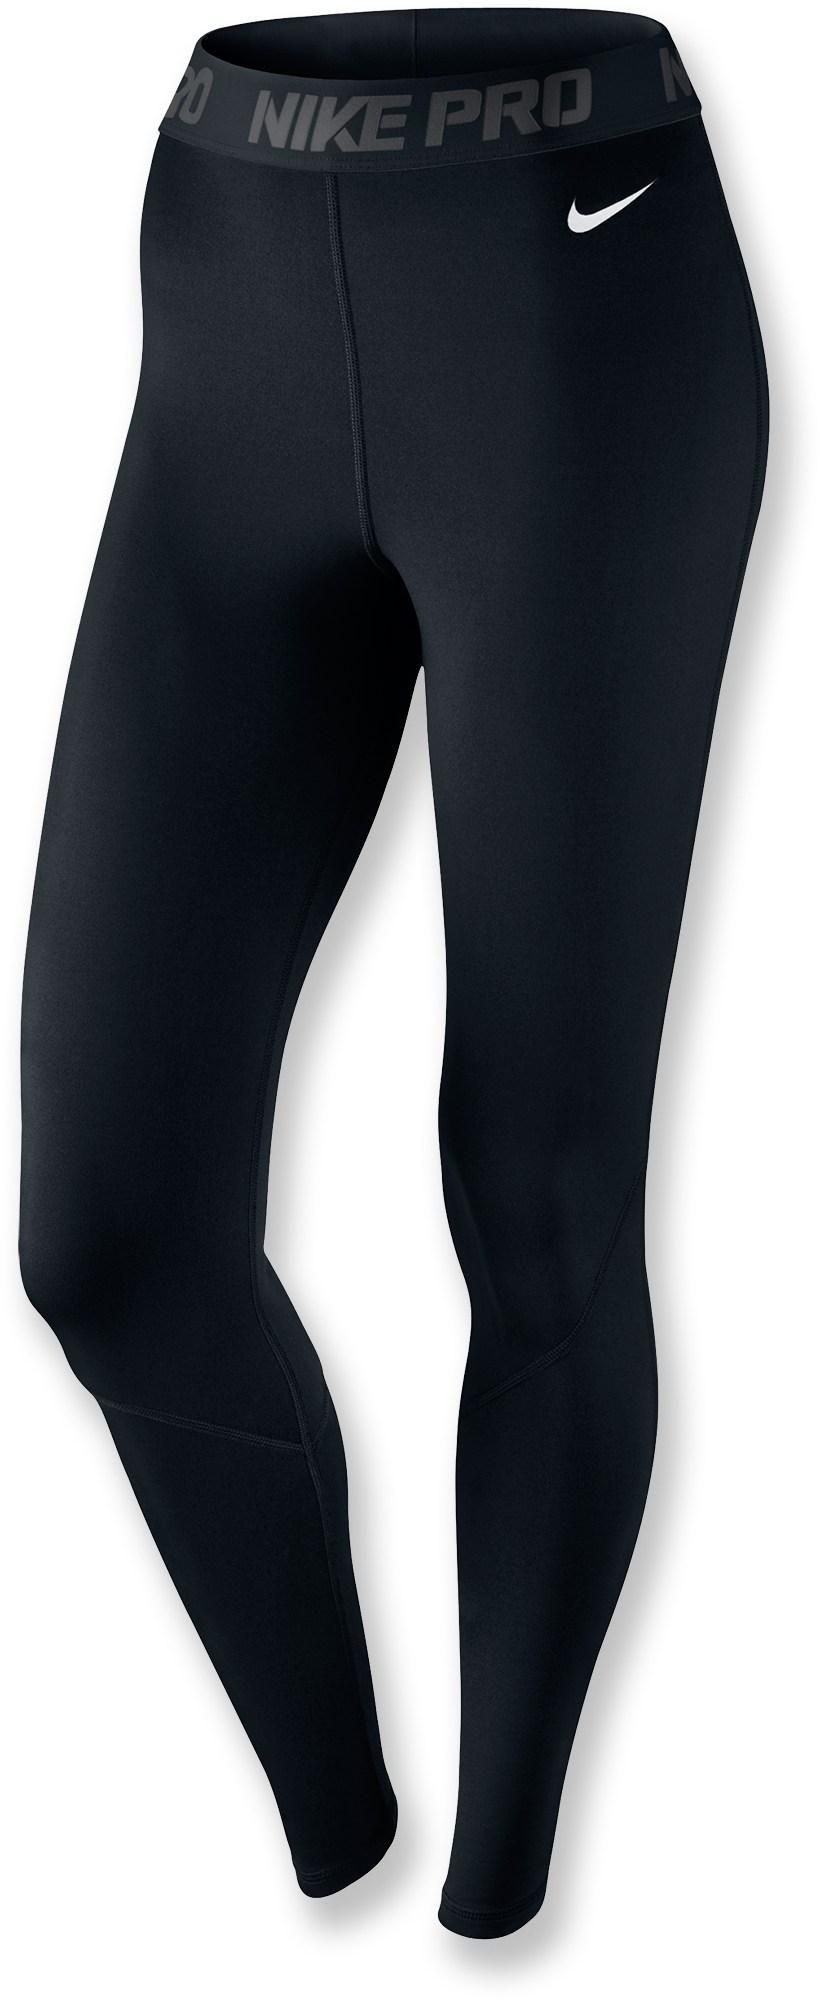 Perfect for cold weather runs. Nike Pro Hyperwarm Tights III – Women’s.